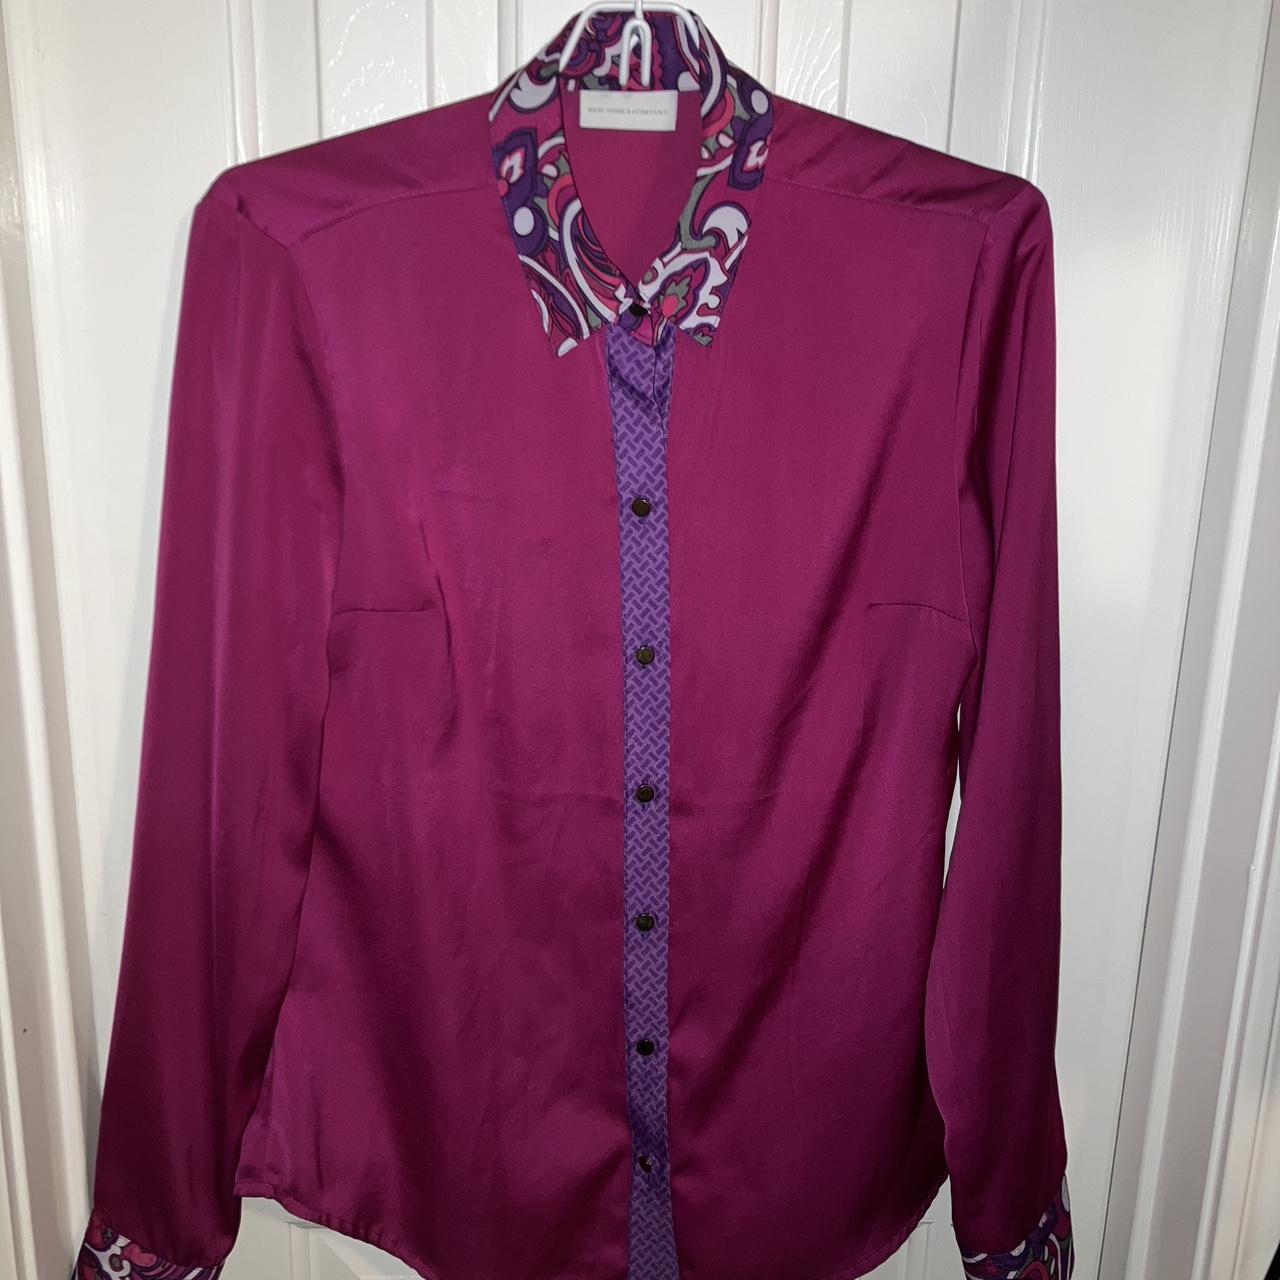 Pink button up shirt with purple and white groovy... - Depop